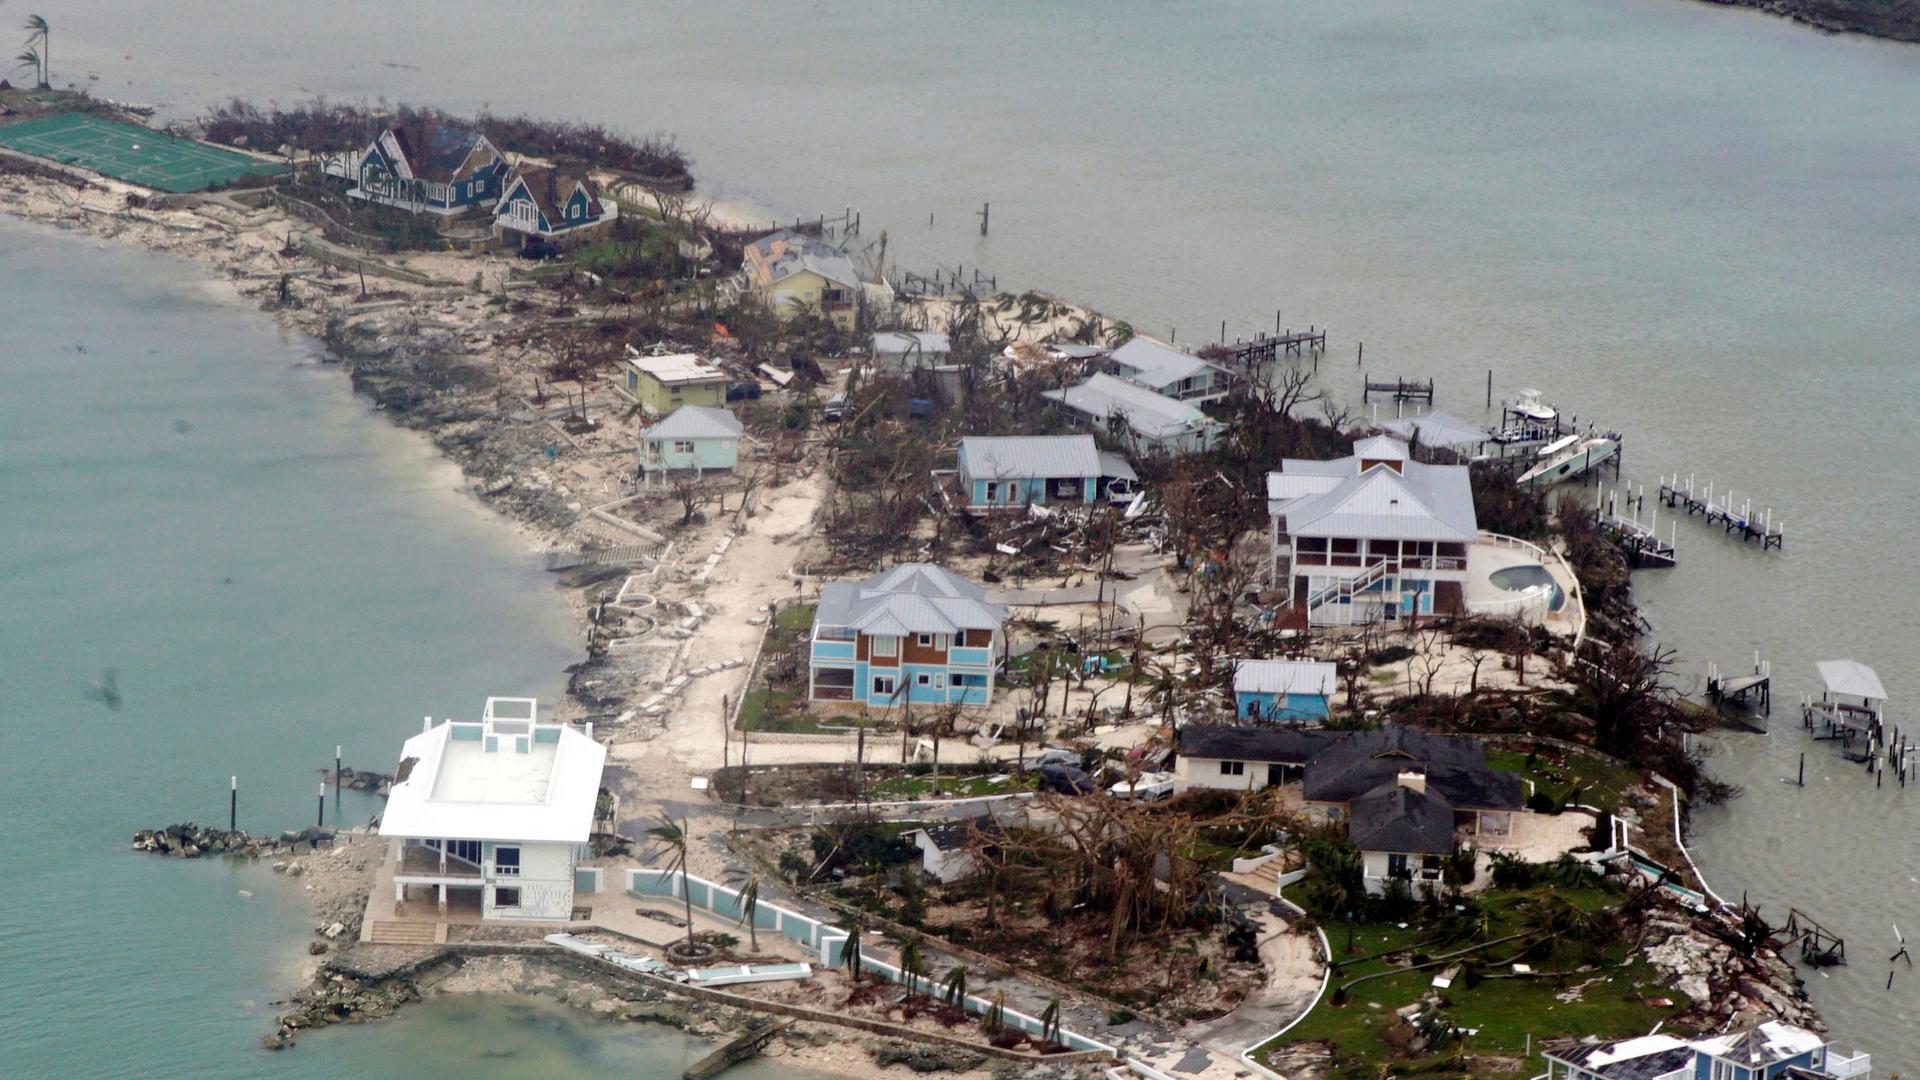 An aerial view of damaged homes, trees and extra debris surrounded by water in the Bahamas.